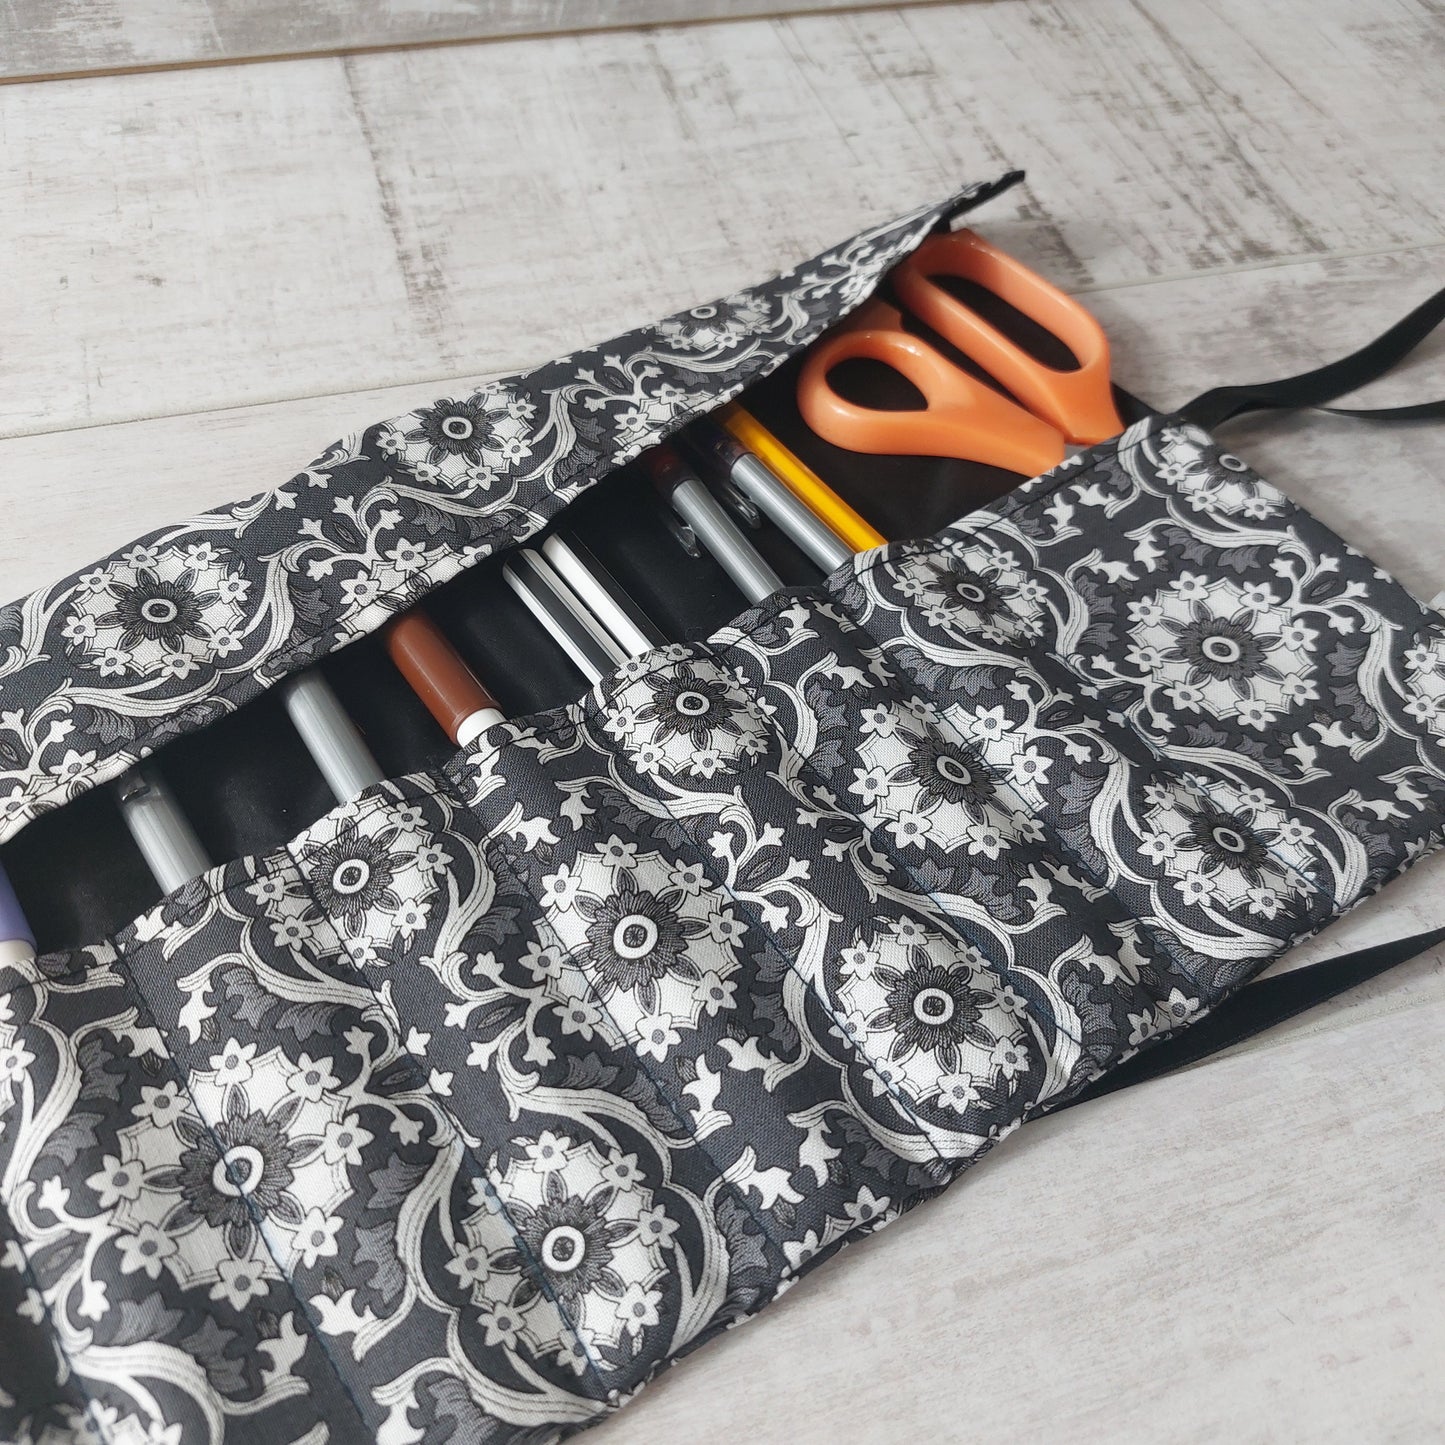 Multi Tool Organiser Roll for pens, markers, craft tools.